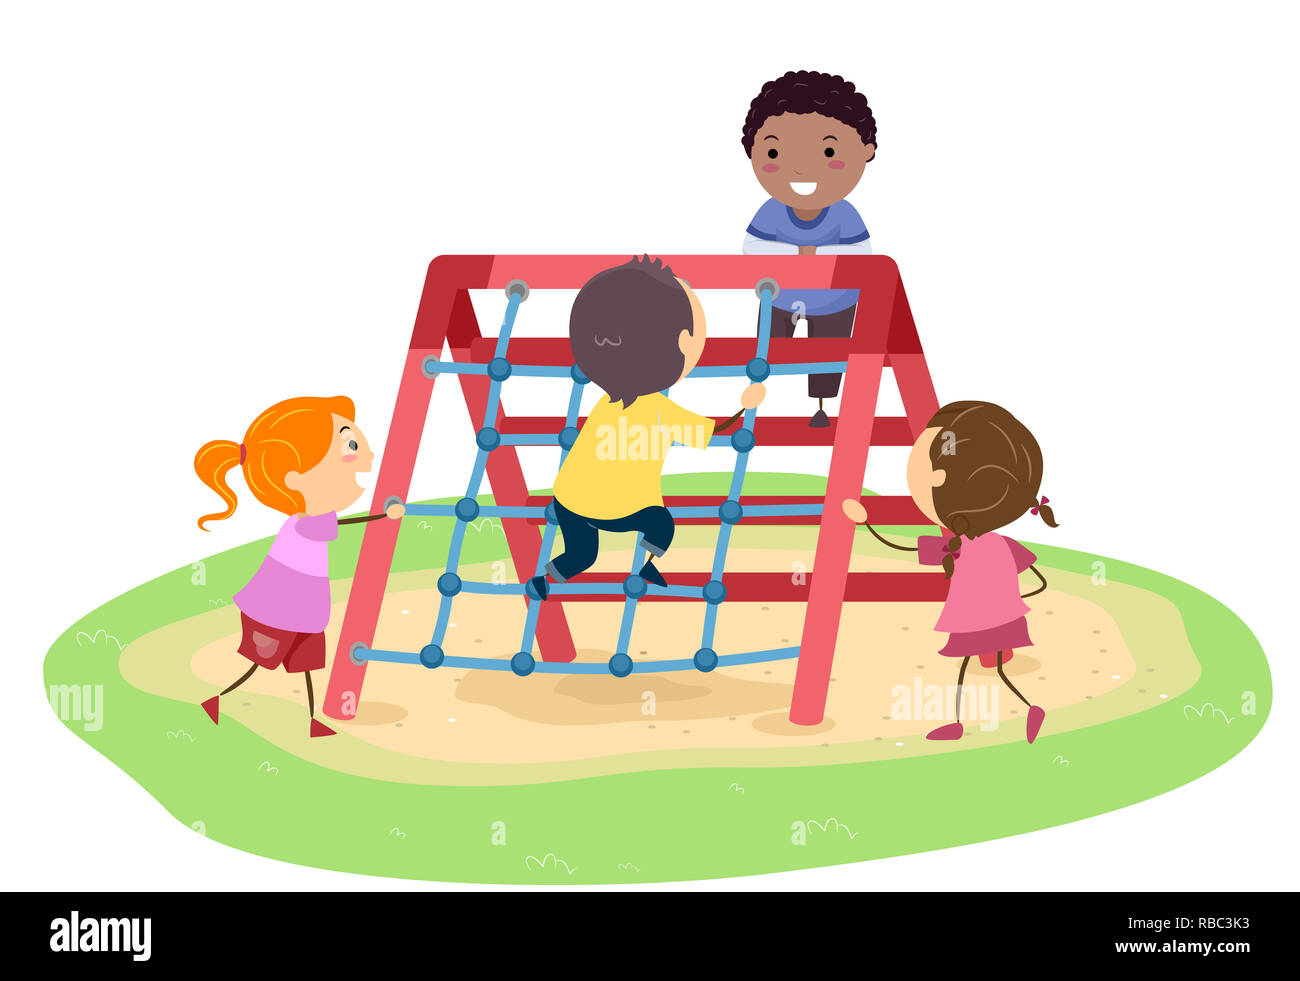 Illustration of Stickman Kids Playing in a Rope Climber in the ...